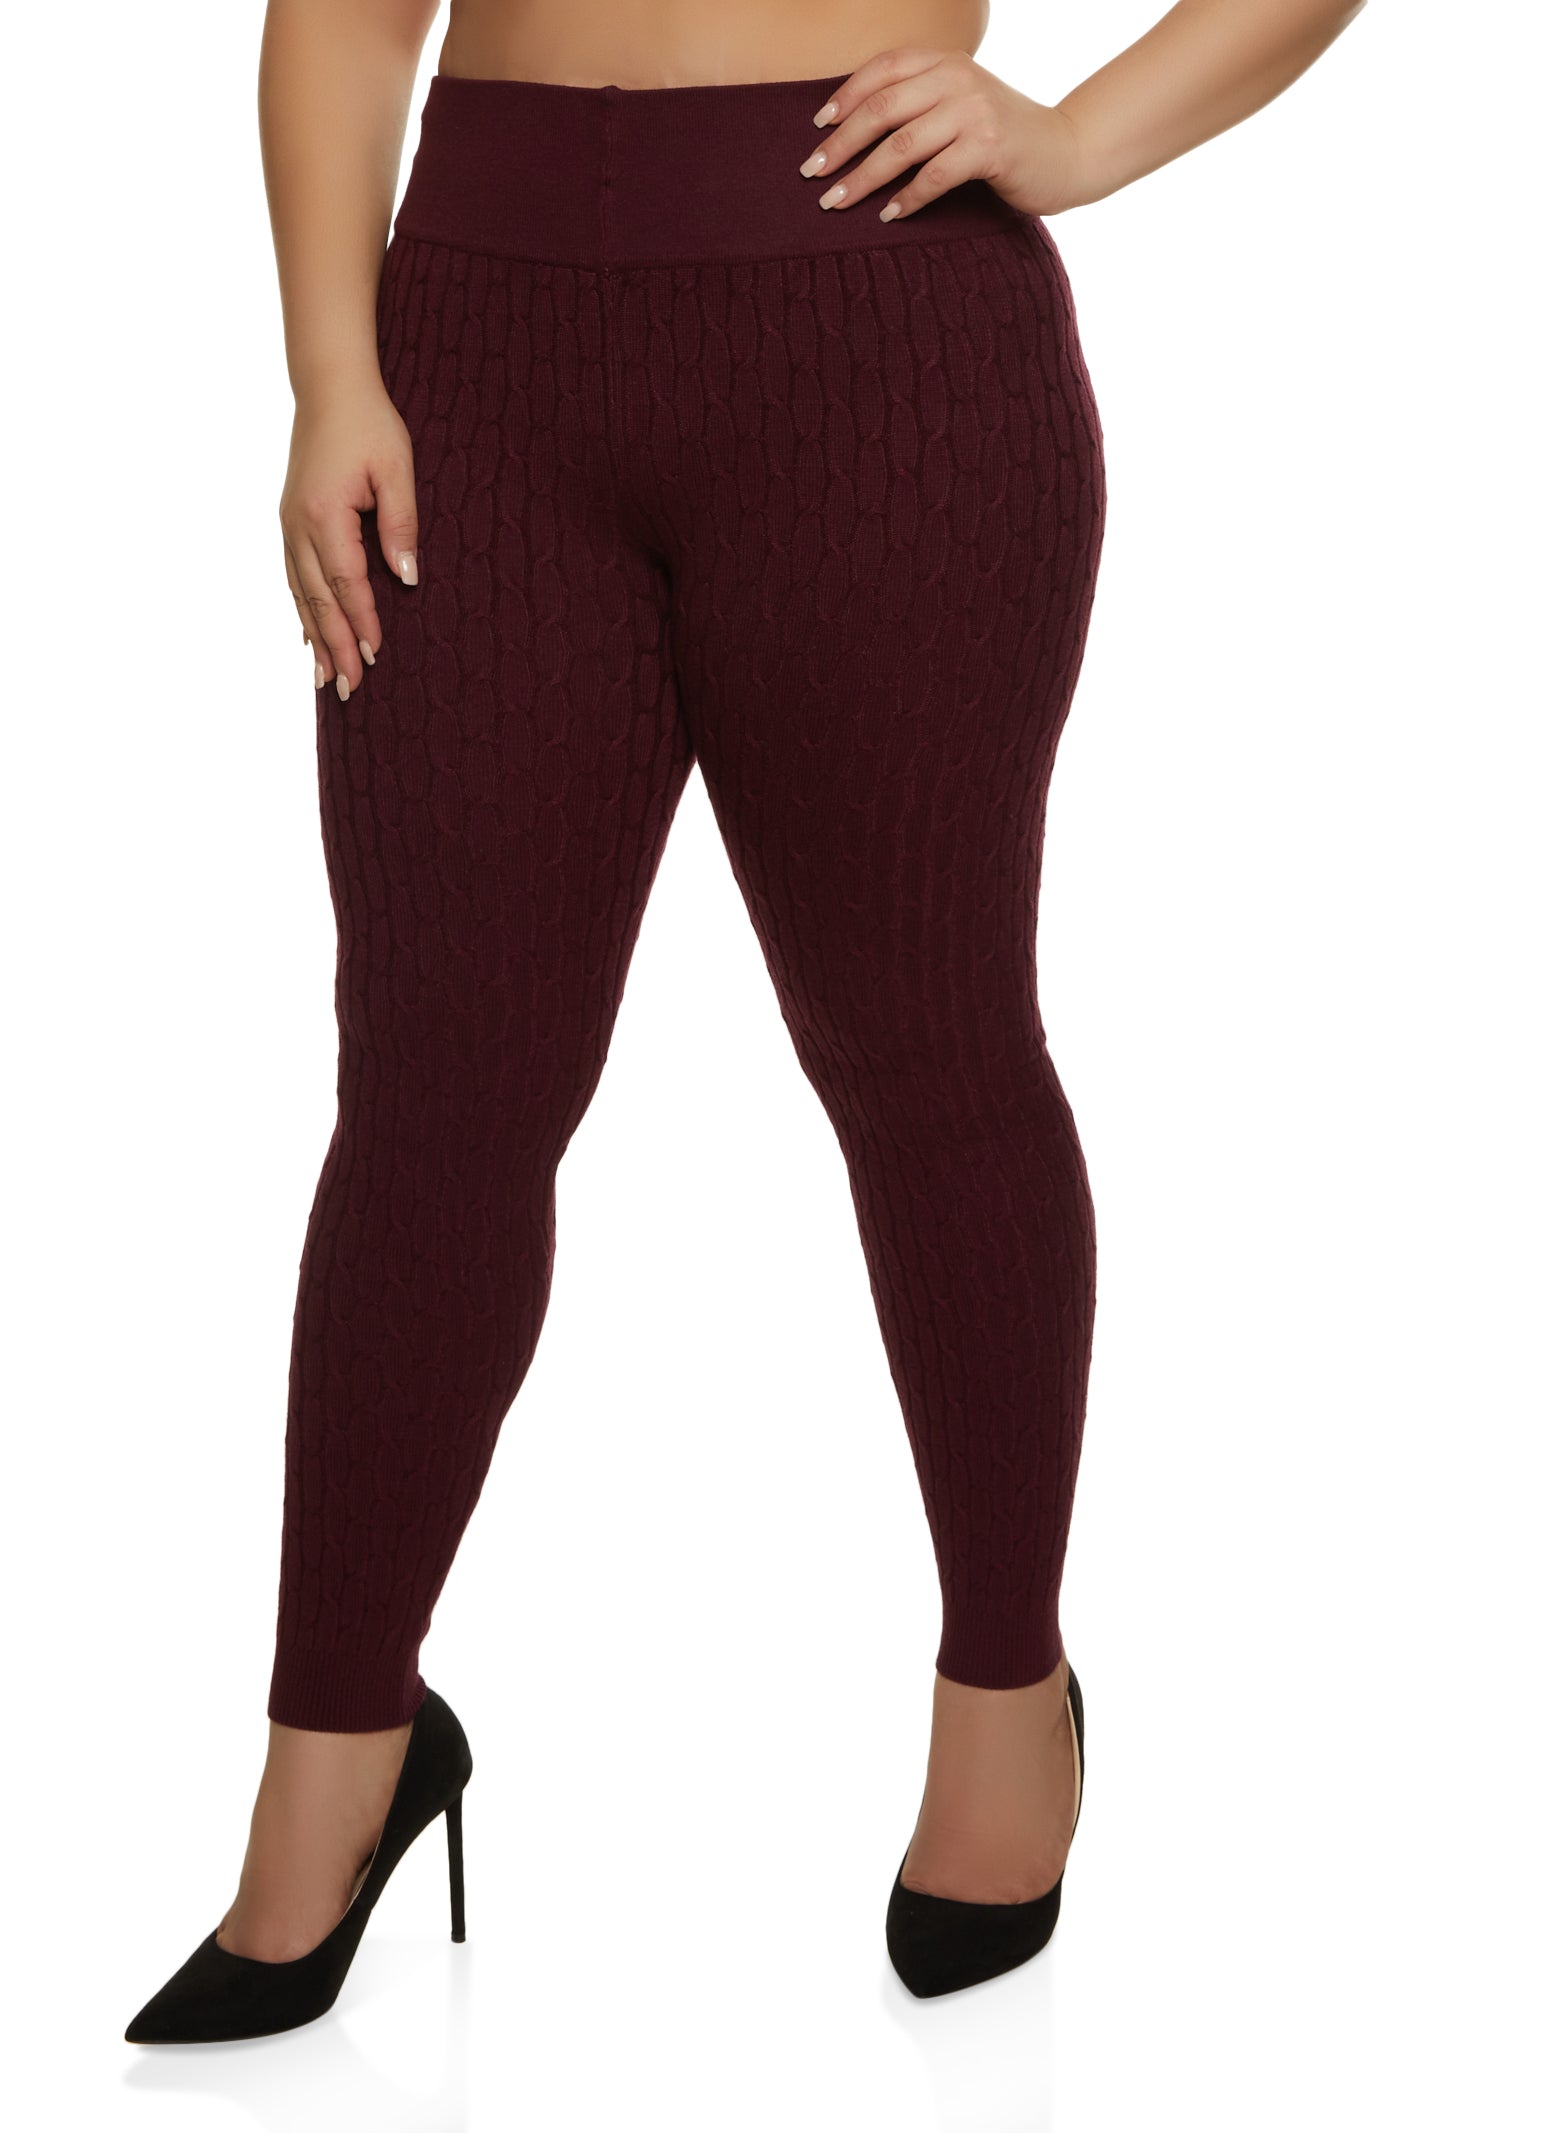 Rainbow Shops Womens Plus Size Cable Knit High Waisted Leggings, Burgundy, Size  3X